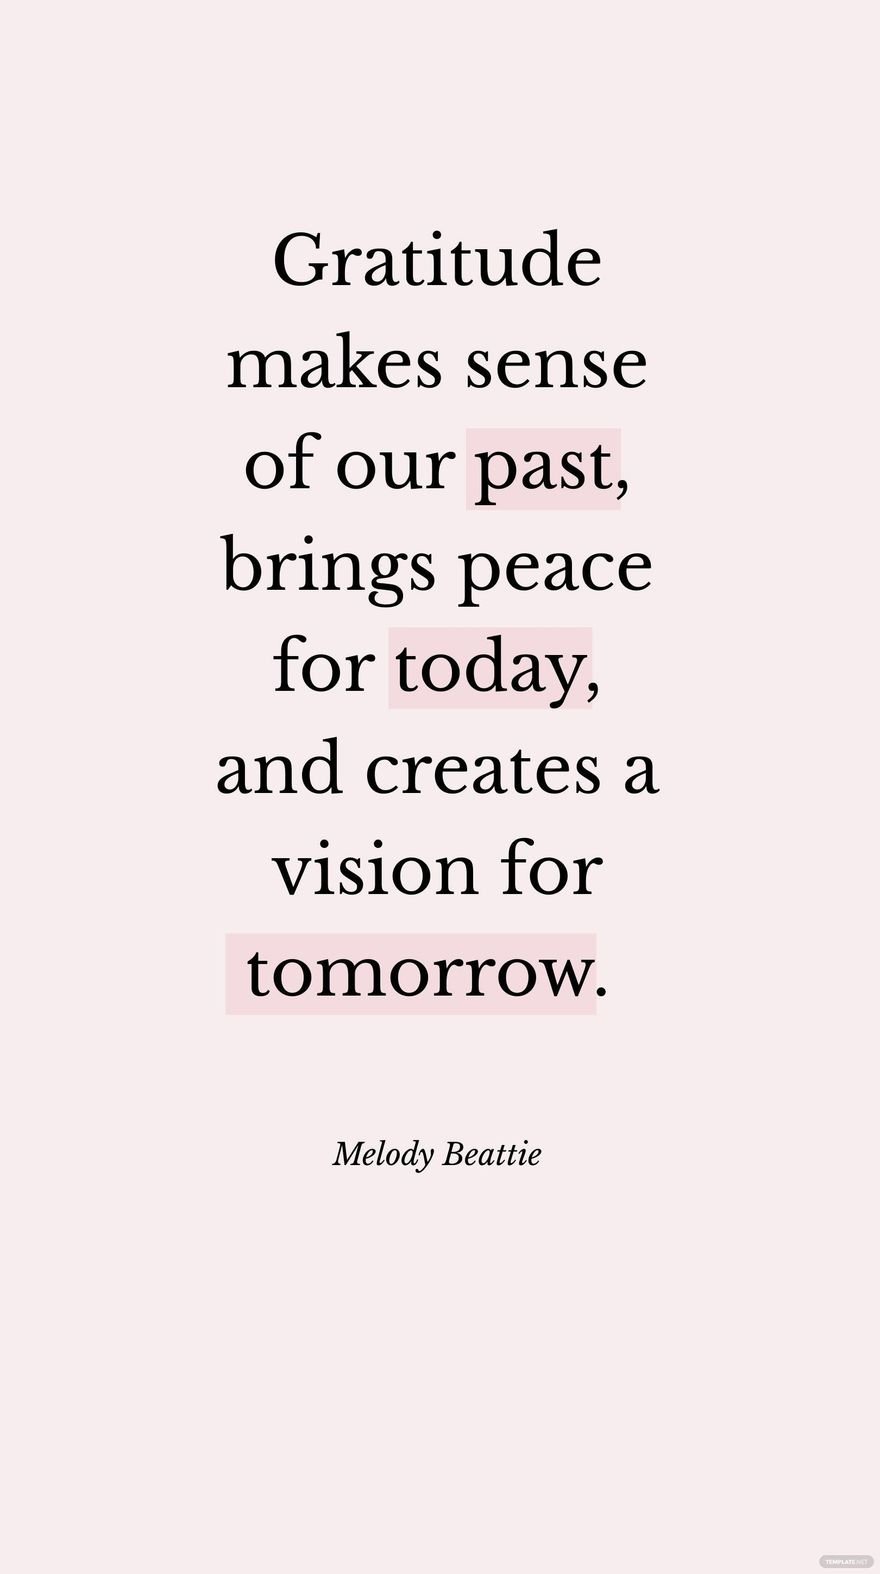 Melody Beattie - Gratitude makes sense of our past, brings peace for today, and creates a vision for tomorrow. in JPG